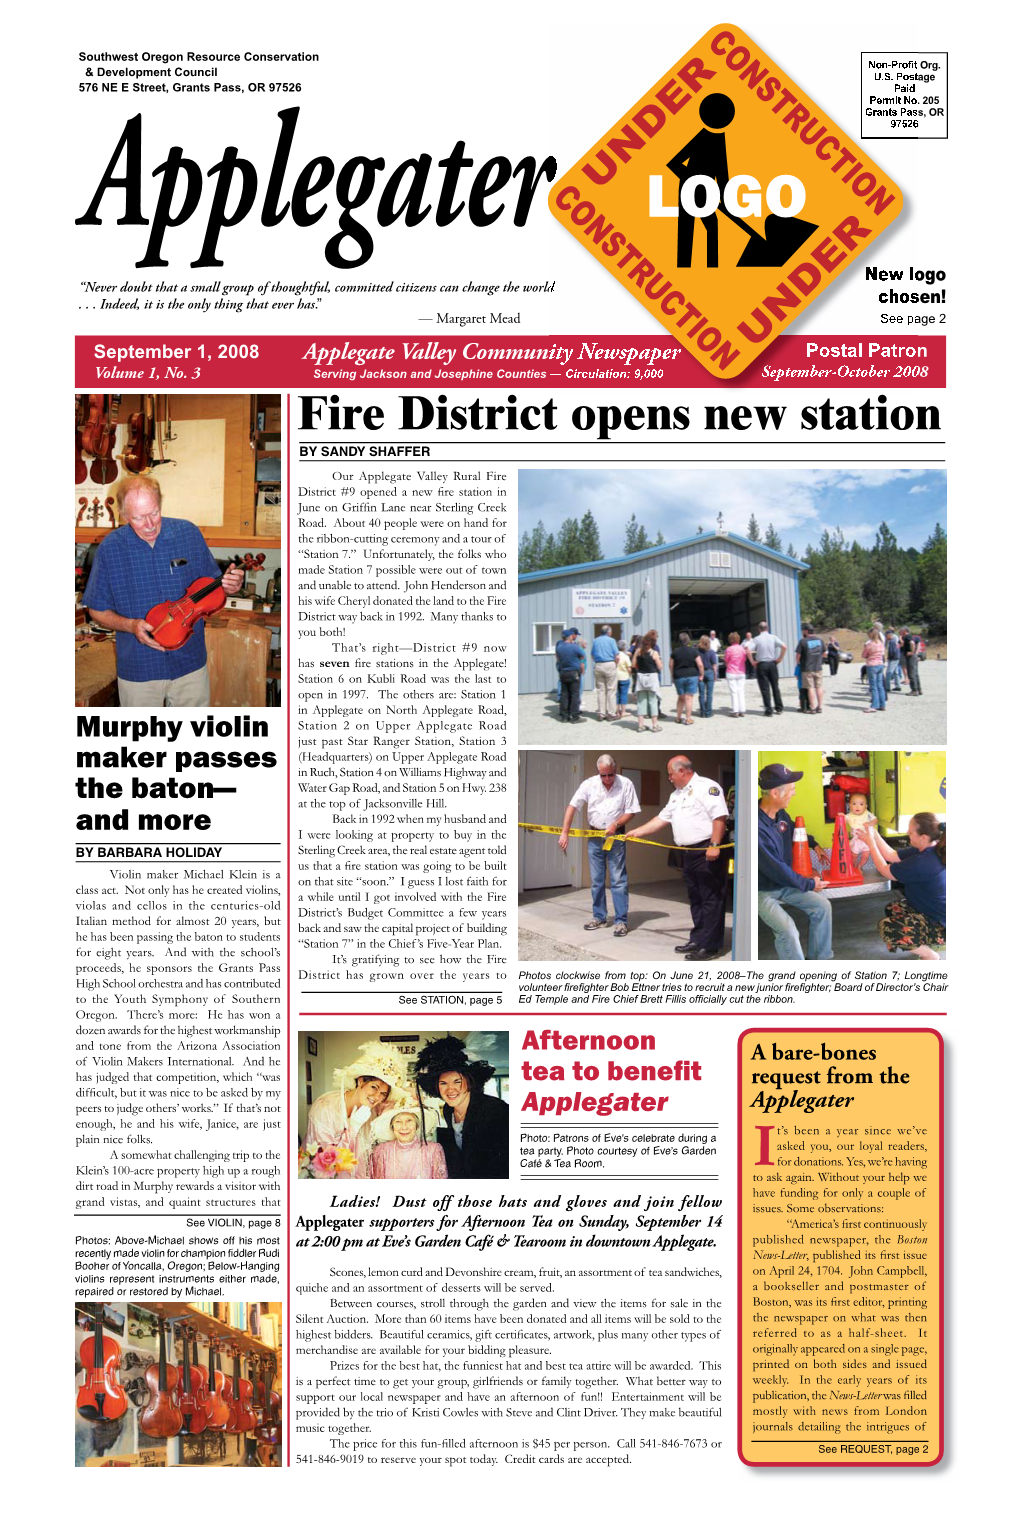 Fire District Opens New Station